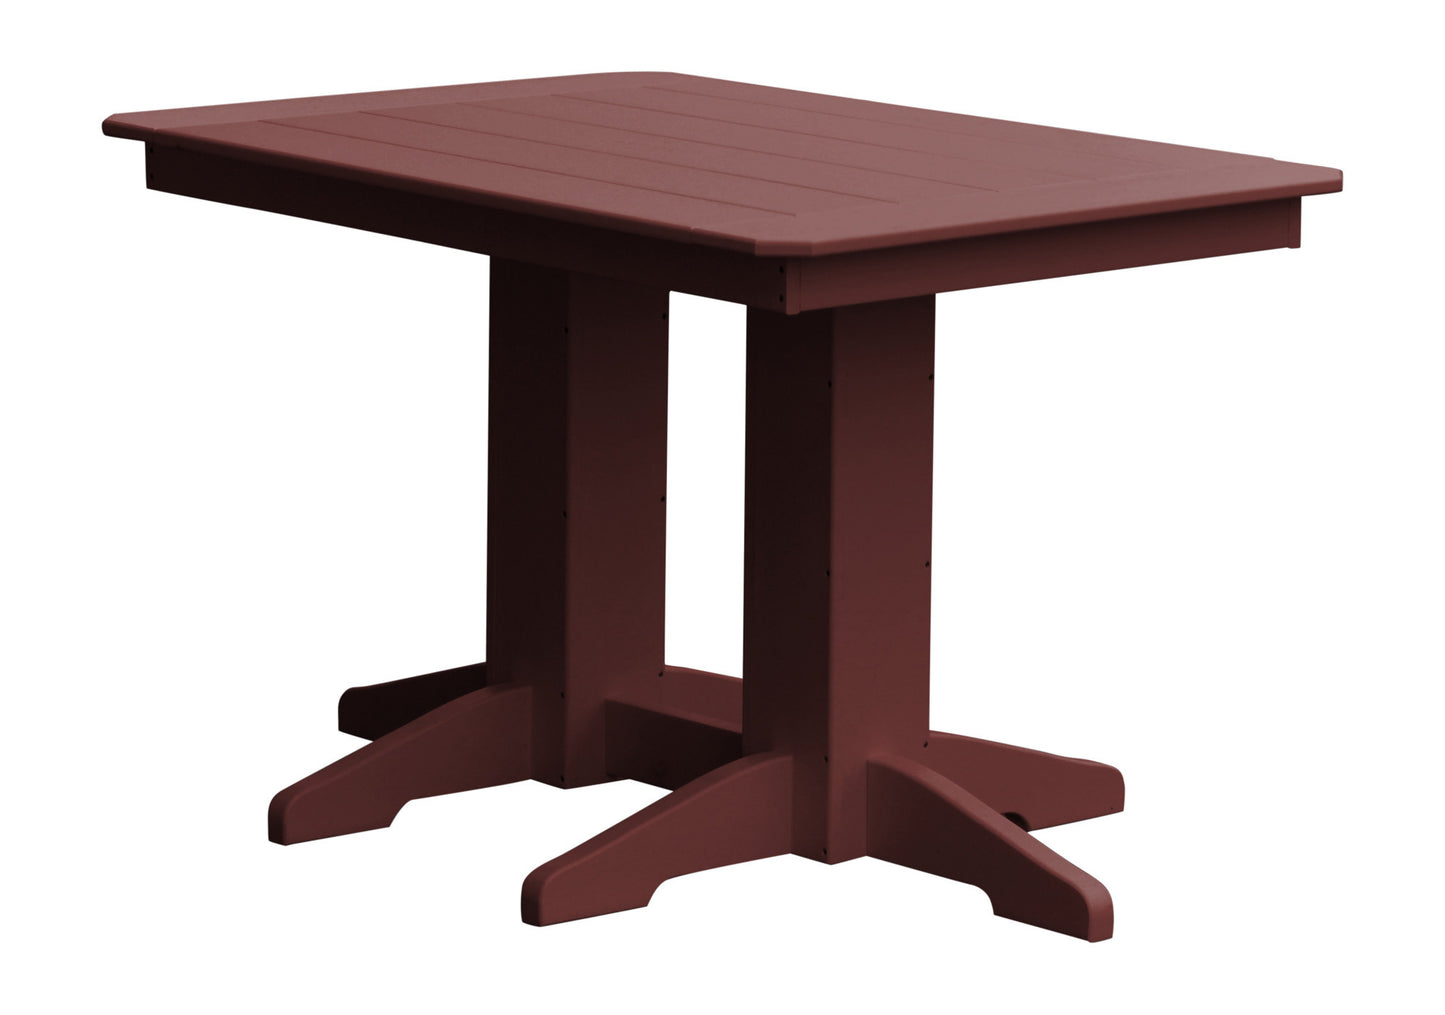 A&L Furniture Company Recycled Plastic 4' Dining Table - Cherrywood